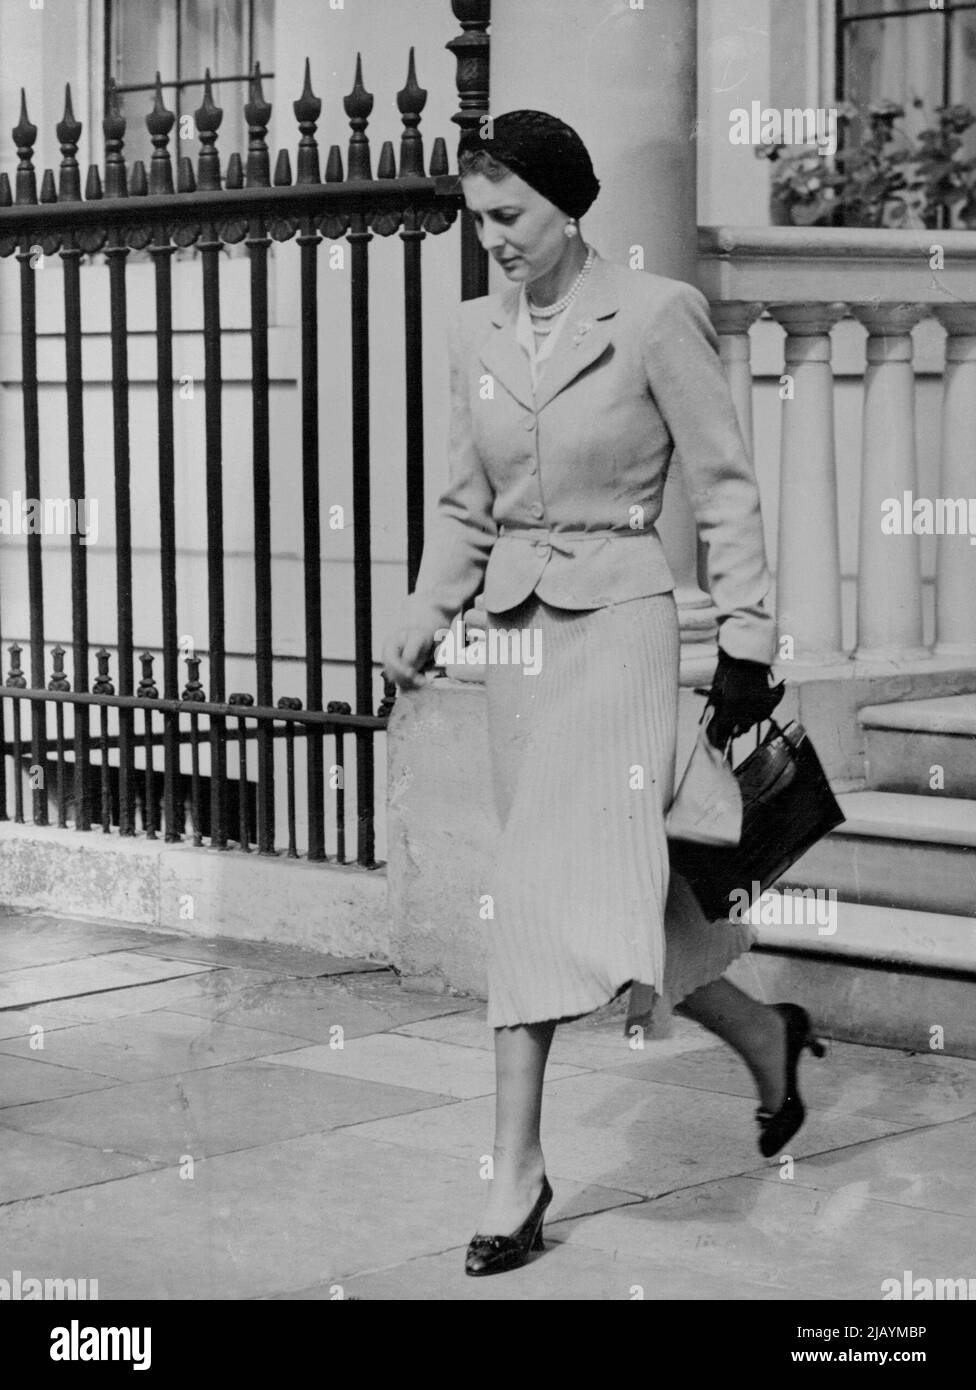 Duchess of Kent Leaves For Italian Royal Wedding -- The Duchess of Kent as she left No. 3, Belgrave Square for Hendon. The Duke and Duchess of Kent left their home in Belgrave Square, London, for Hendon Aerodrome, from where they left by air for Florence to attend the wedding of the Duke of Spoleto, son of King Victor Emmanuel of Italy, to Princess Irene of Greece. June 30, 1939. Stock Photo